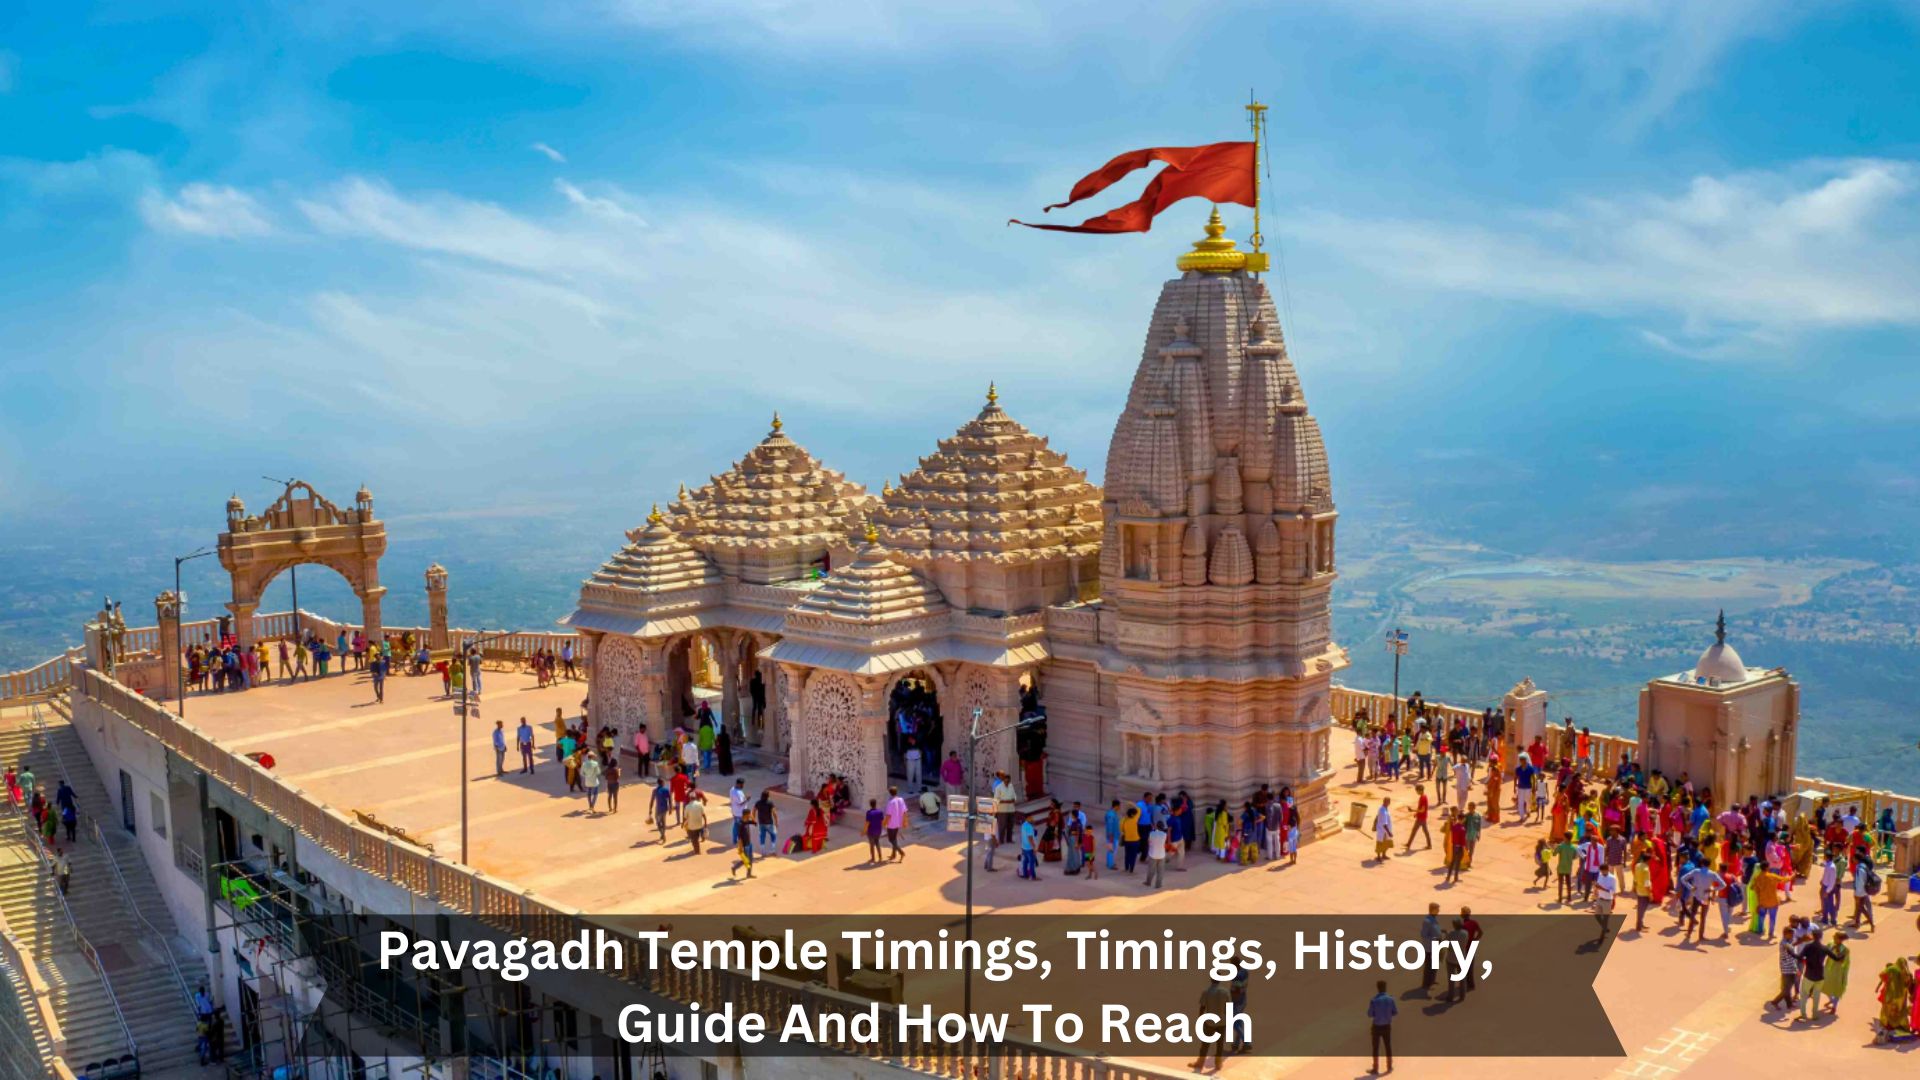 Pavagadh-Temple-Timings-Timings-History-Guide-And-How-To-Reach